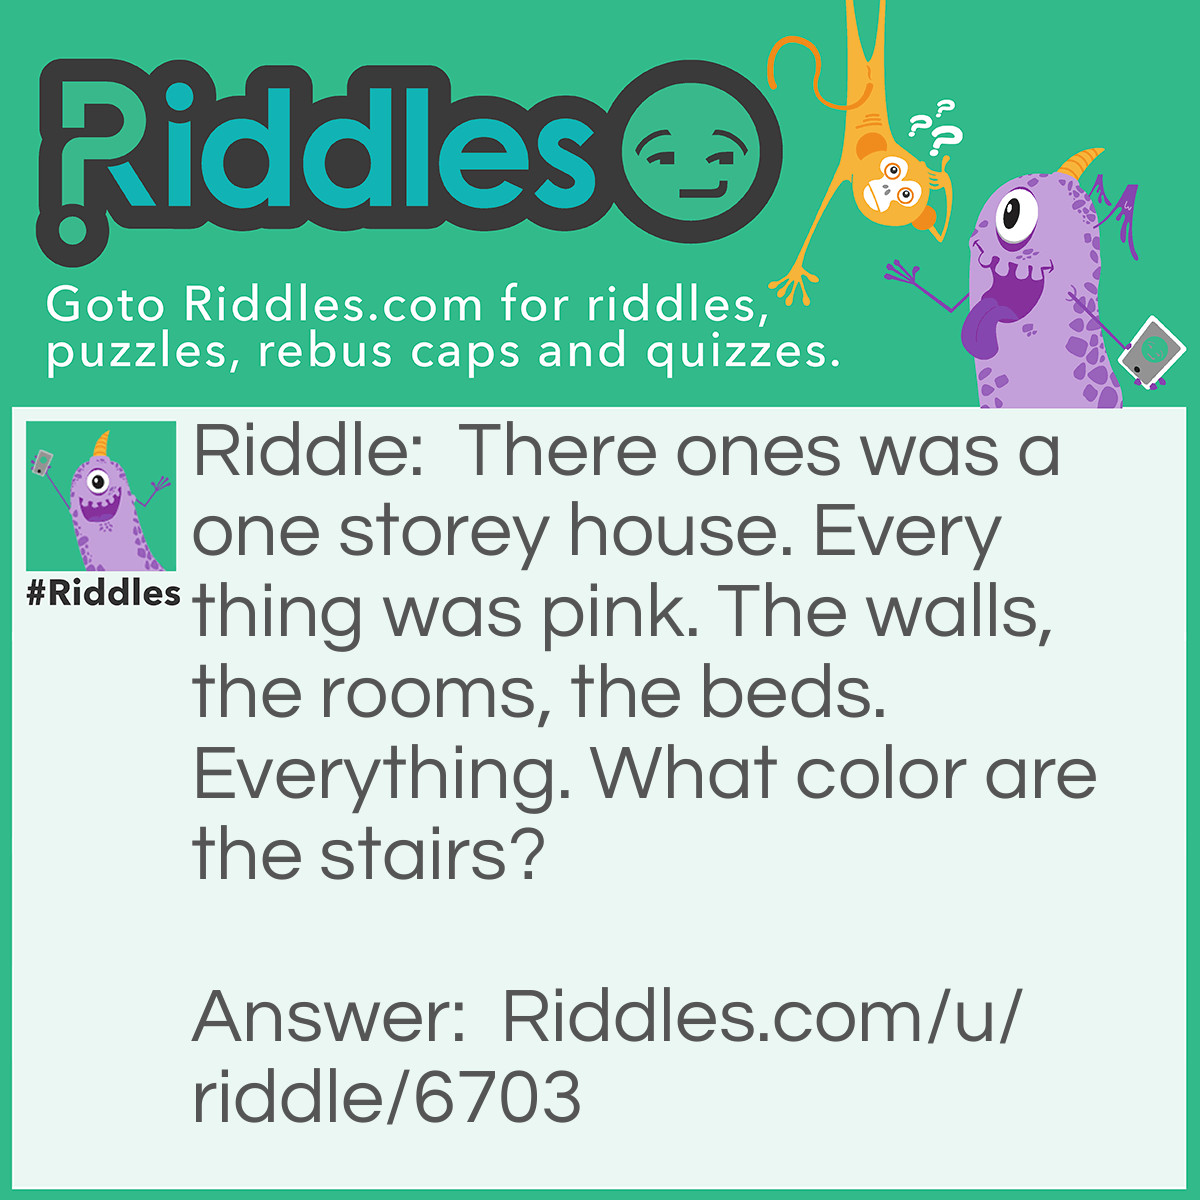 Riddle: There ones was a one storey house. Every thing was pink. The walls, the rooms, the beds. Everything. What color are the stairs? Answer: There were no stairs!